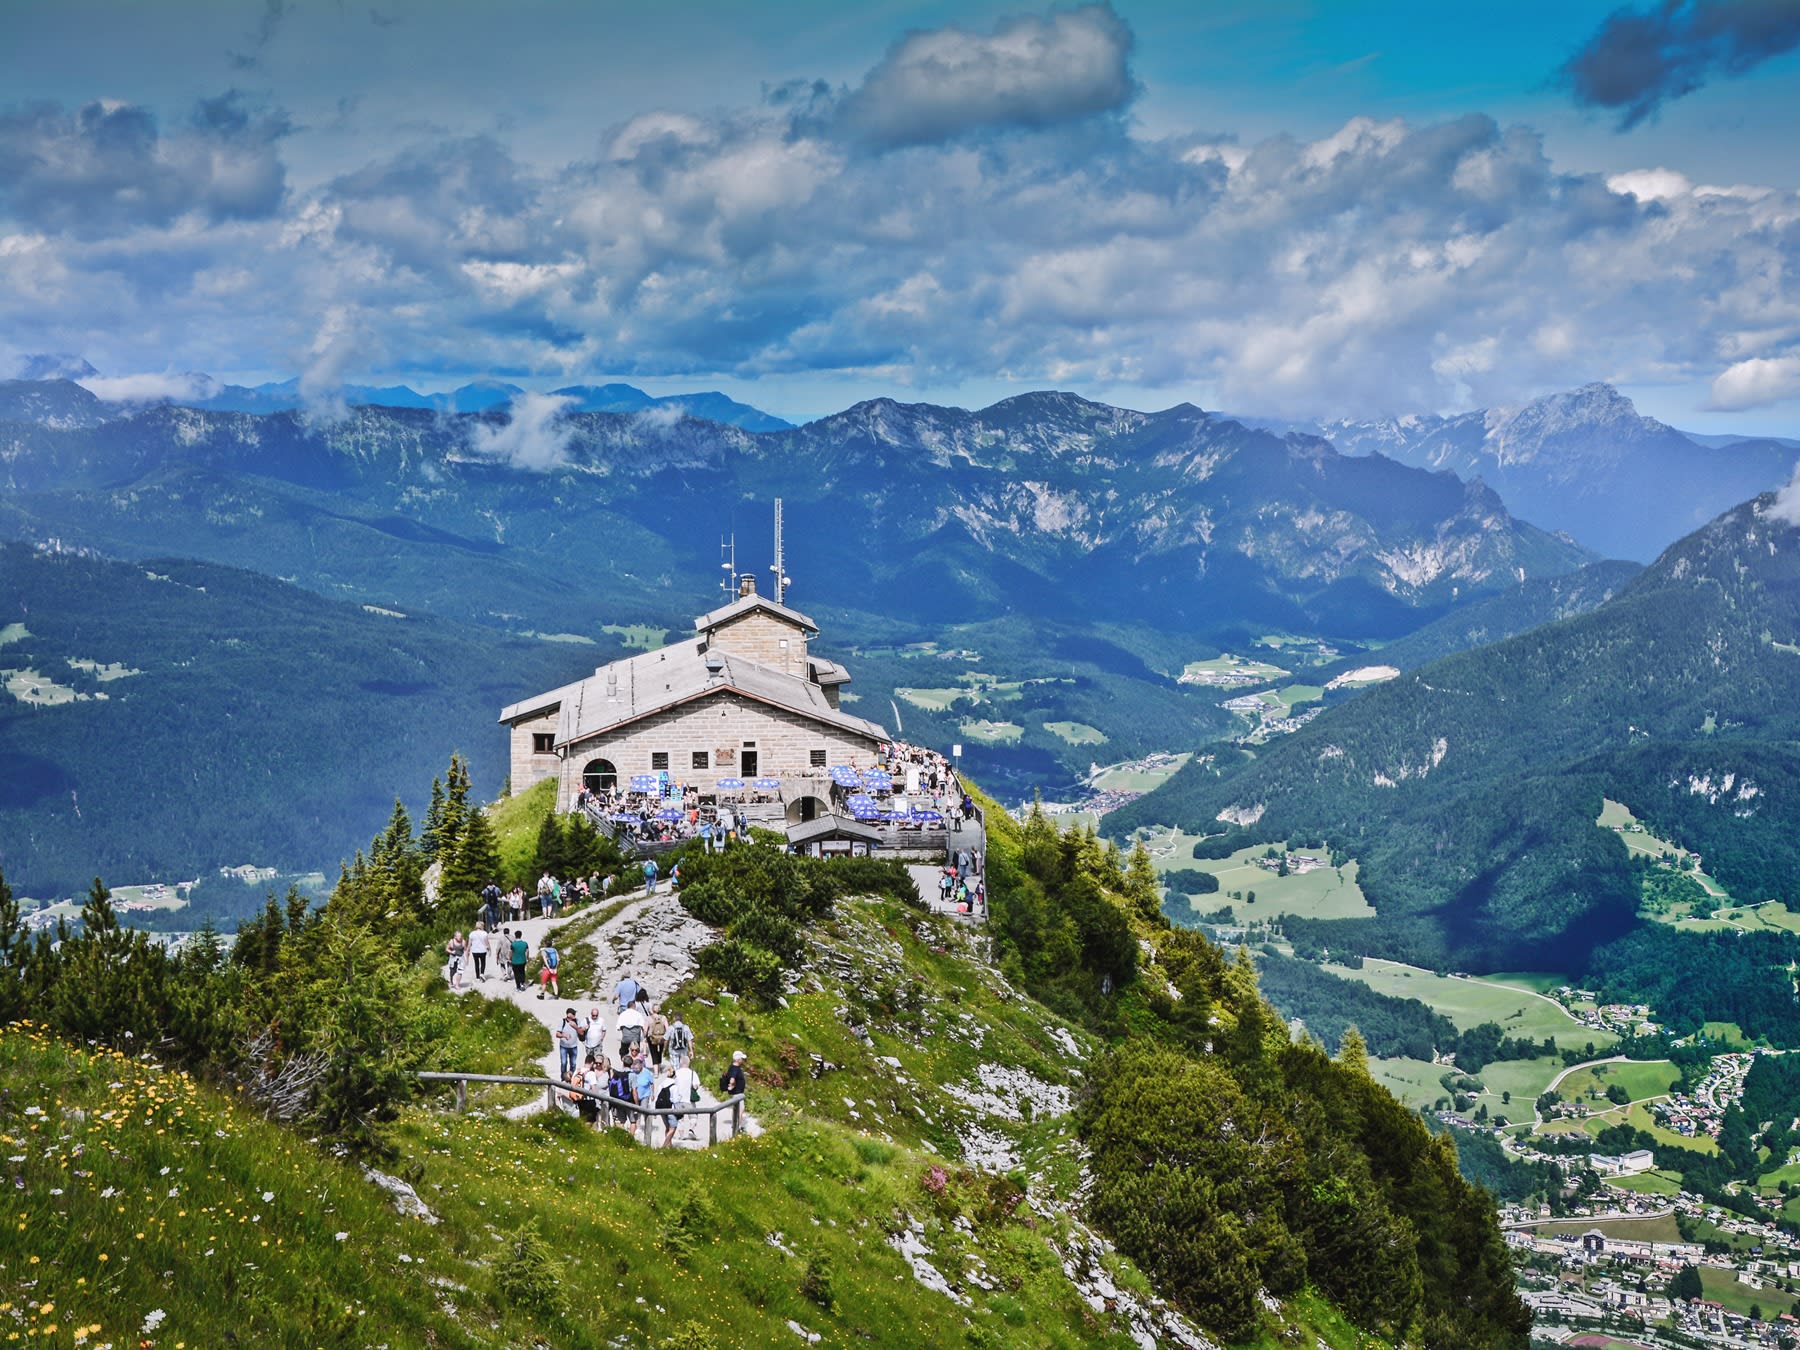 Hitler's Eagle's Nest and Berchtesgaden Day Tour from Salzburg tours,  activities, fun things to do in Salzburg(Austria)｜VELTRA